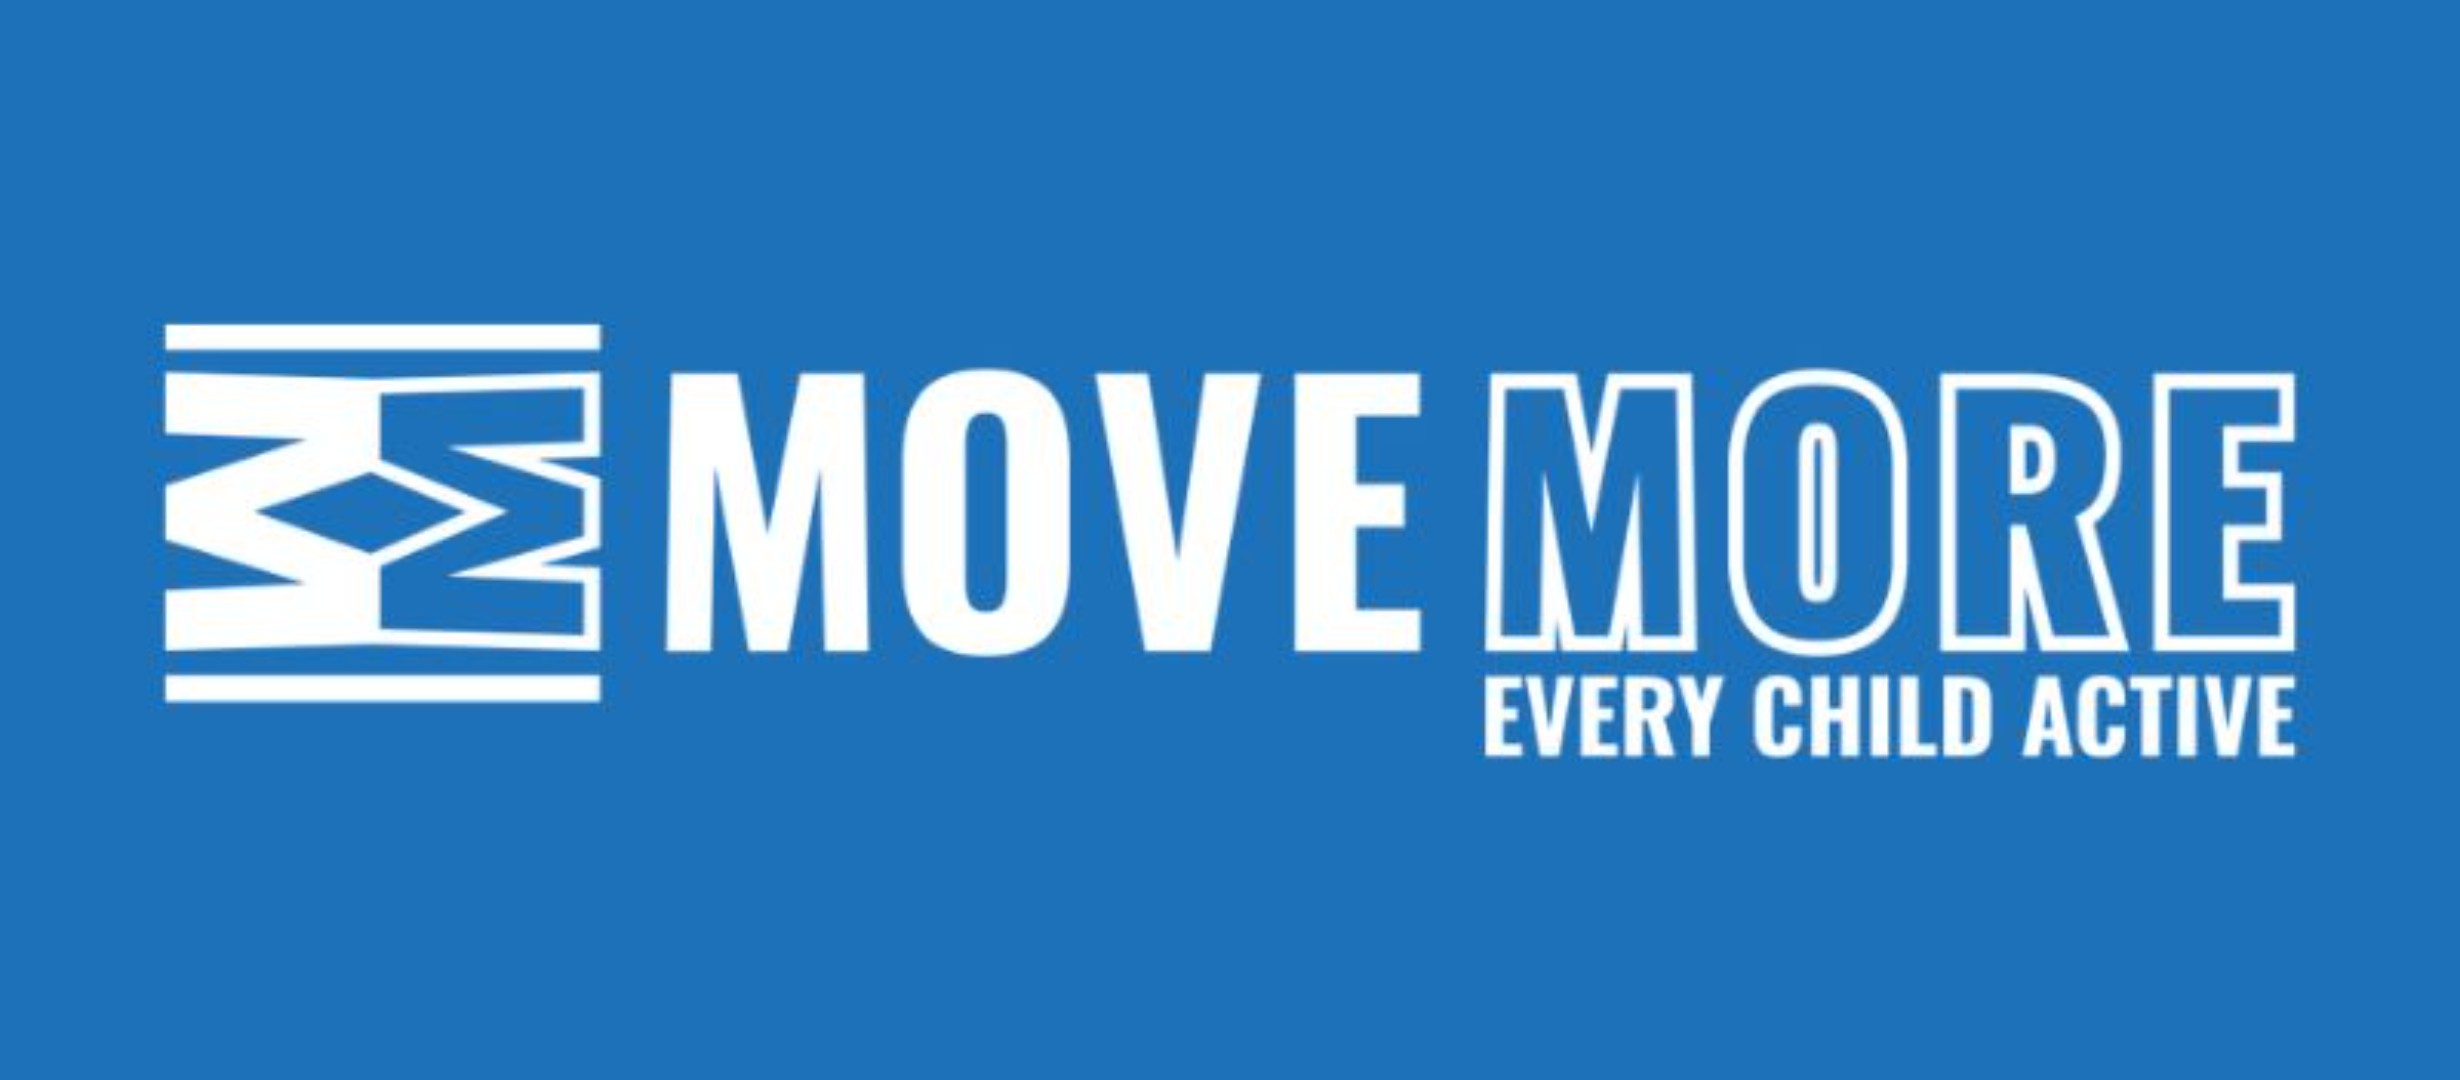 White Move More text on a blue background with the charities vision Every Child Active displayed underneath